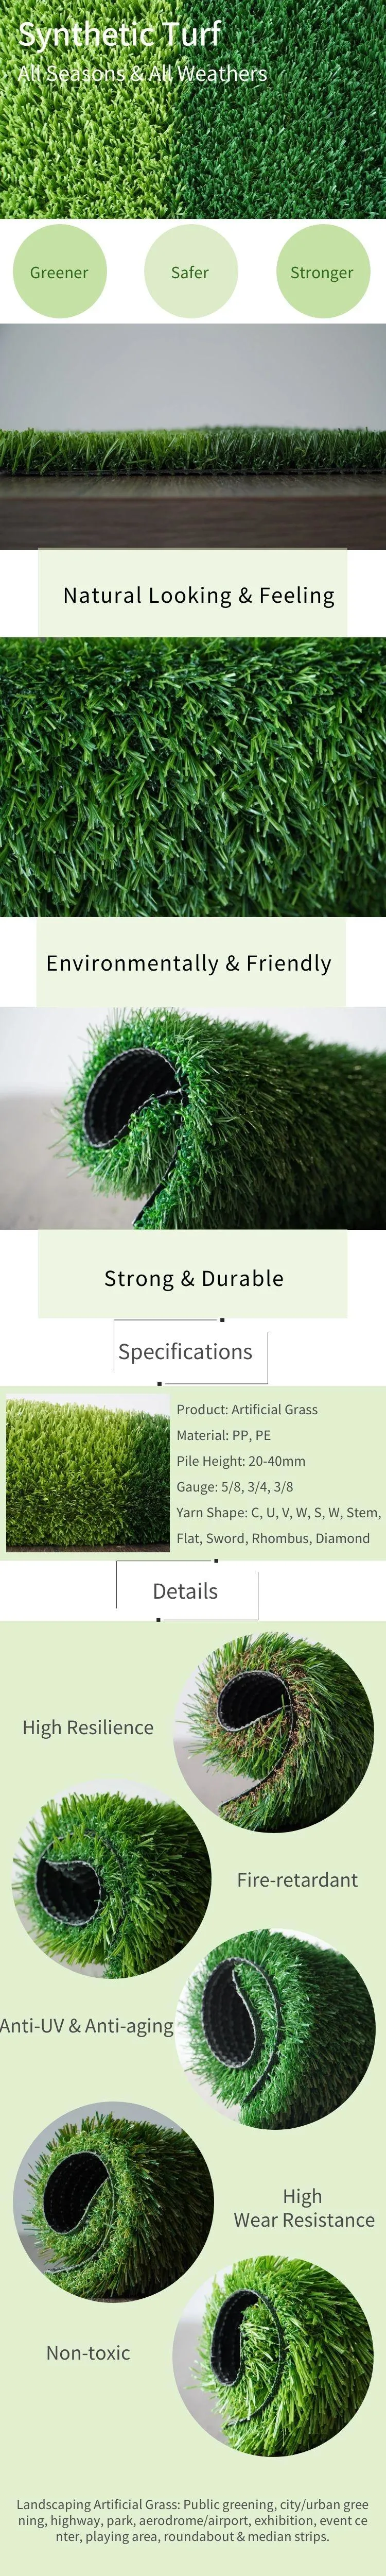 Artificial Grass Outdoor Green High Density Fake Lawn Turf of Dogs Pets Natural&Realistic Looking Garden Tidy Lush 40mm Pile Height